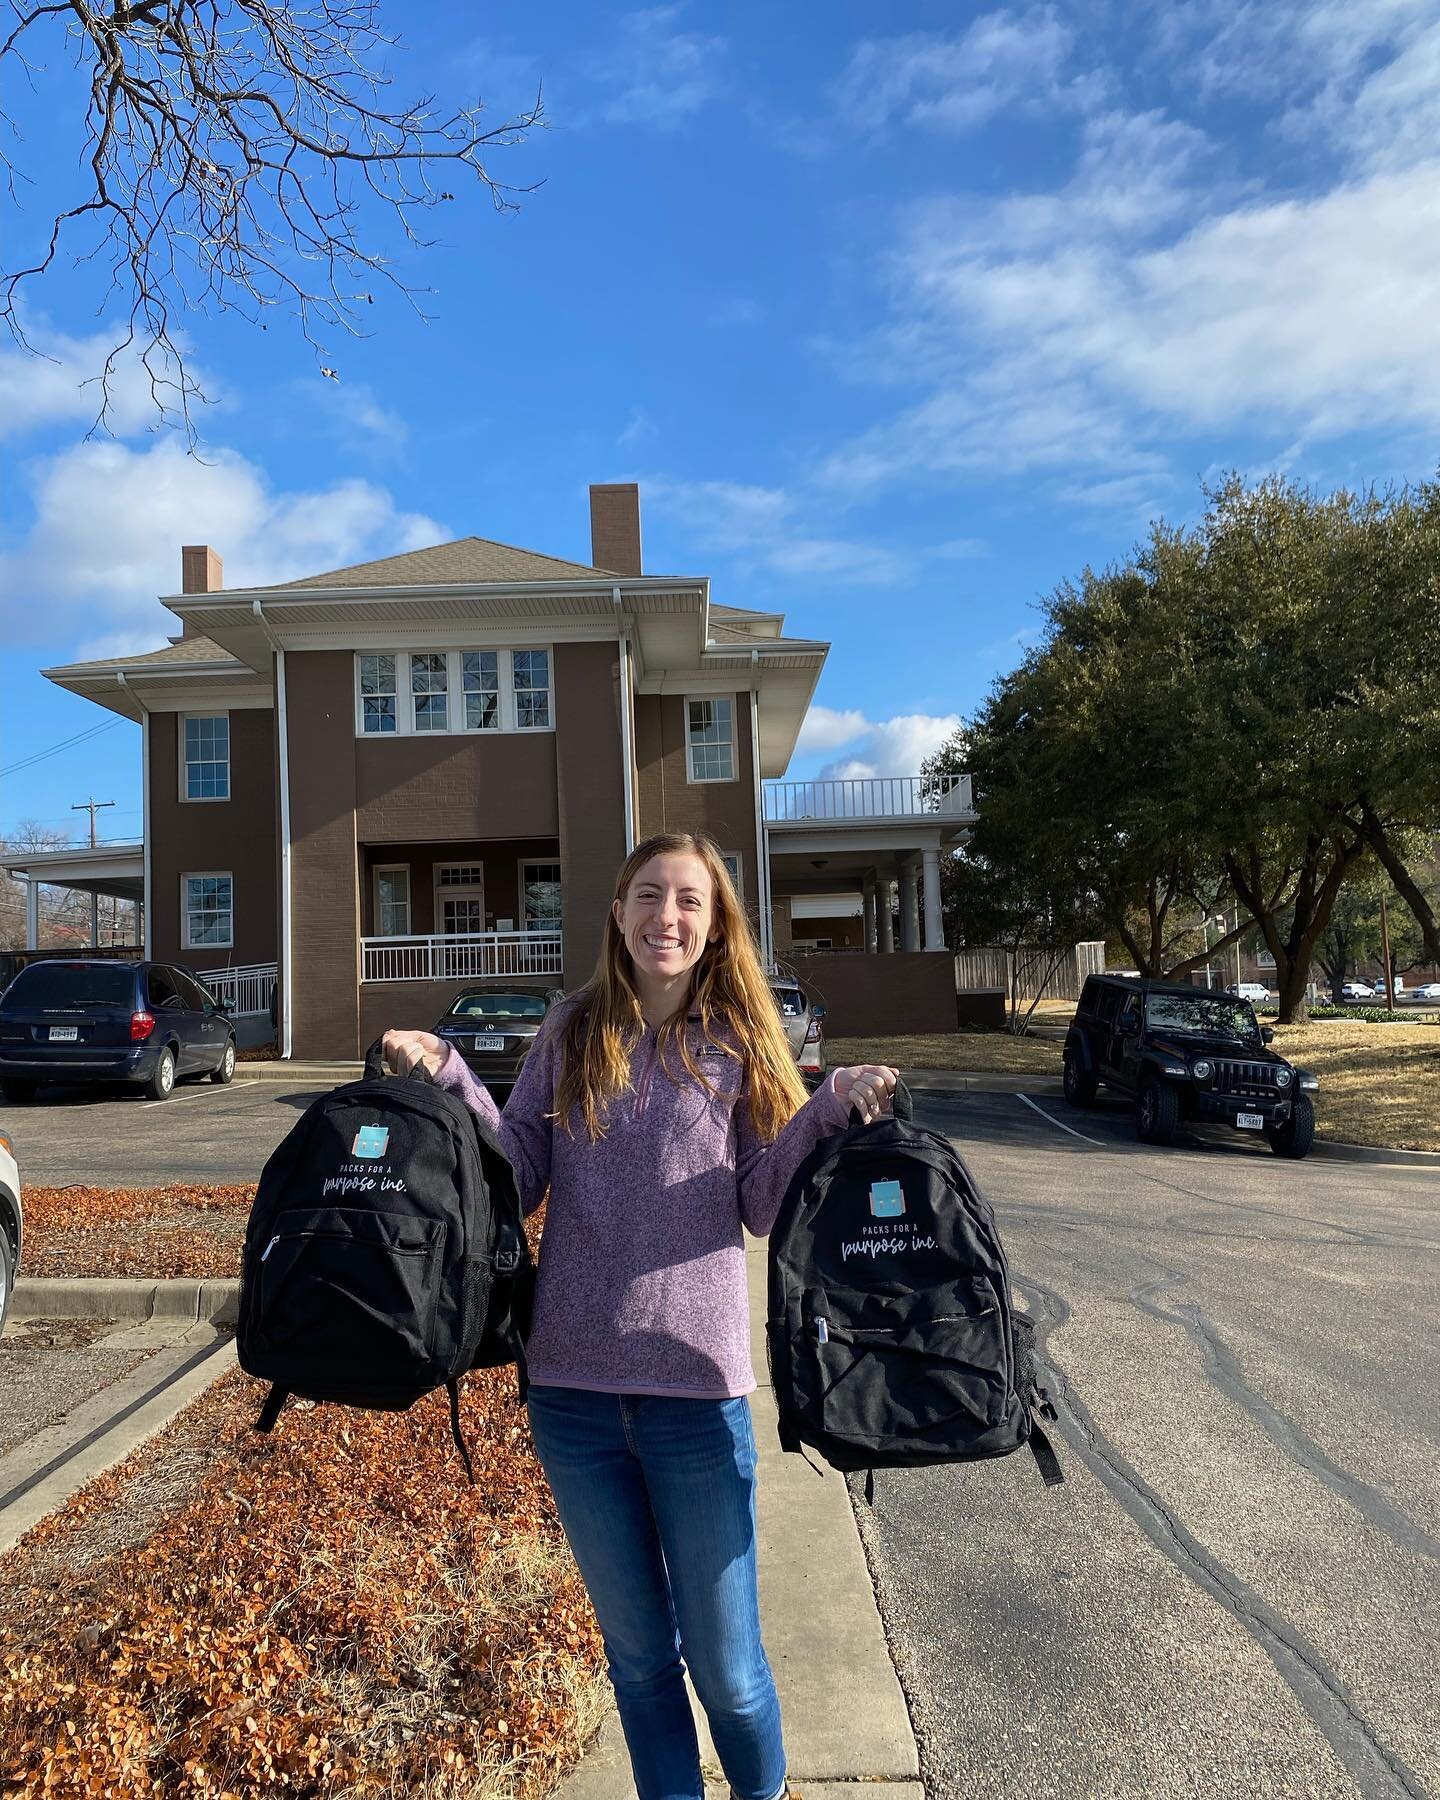 Packs for a Purpose Inc. &mdash;&gt; Waco, Texas ☀️
Thanks to board member Karleigh Schilling, we were able to deliver over 30 packs to Compassion Ministries in Waco, Texas!